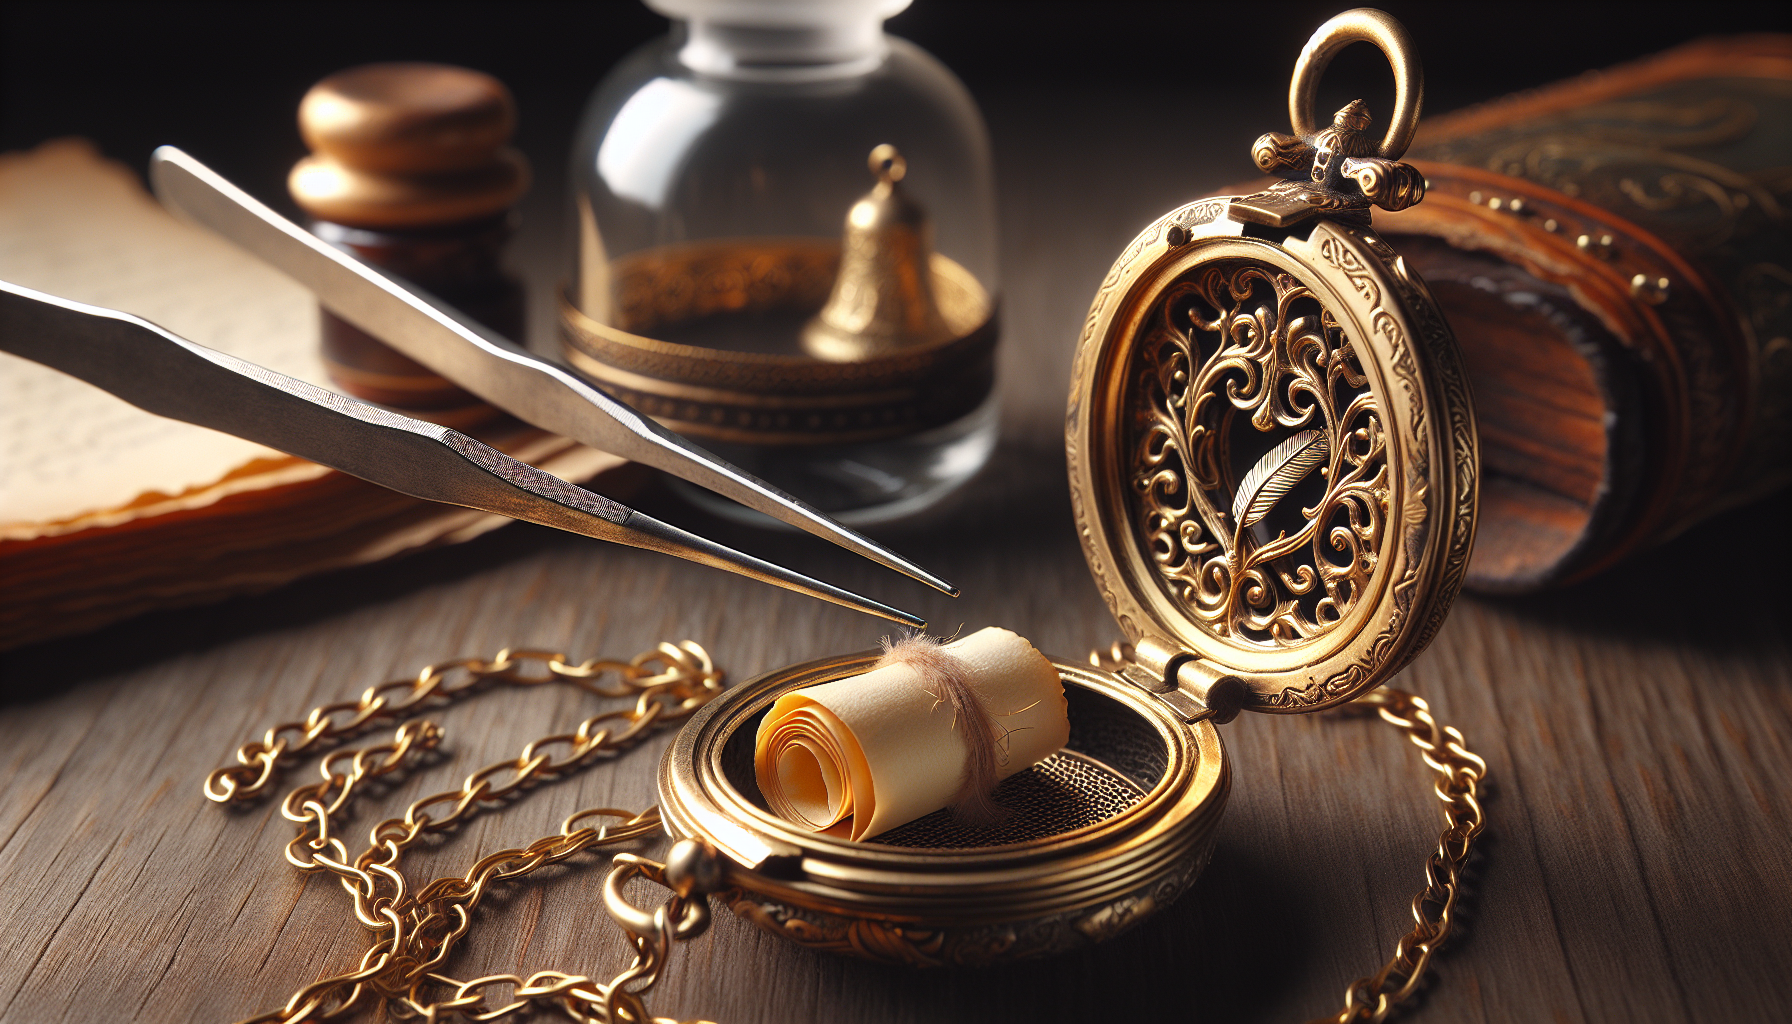 An intricately designed golden locket being opened by a pair of fine tweezers. Inside the locket, a tiny, rolled up piece of parchment is revealed, about to be carefully taken out and unrolled to unve